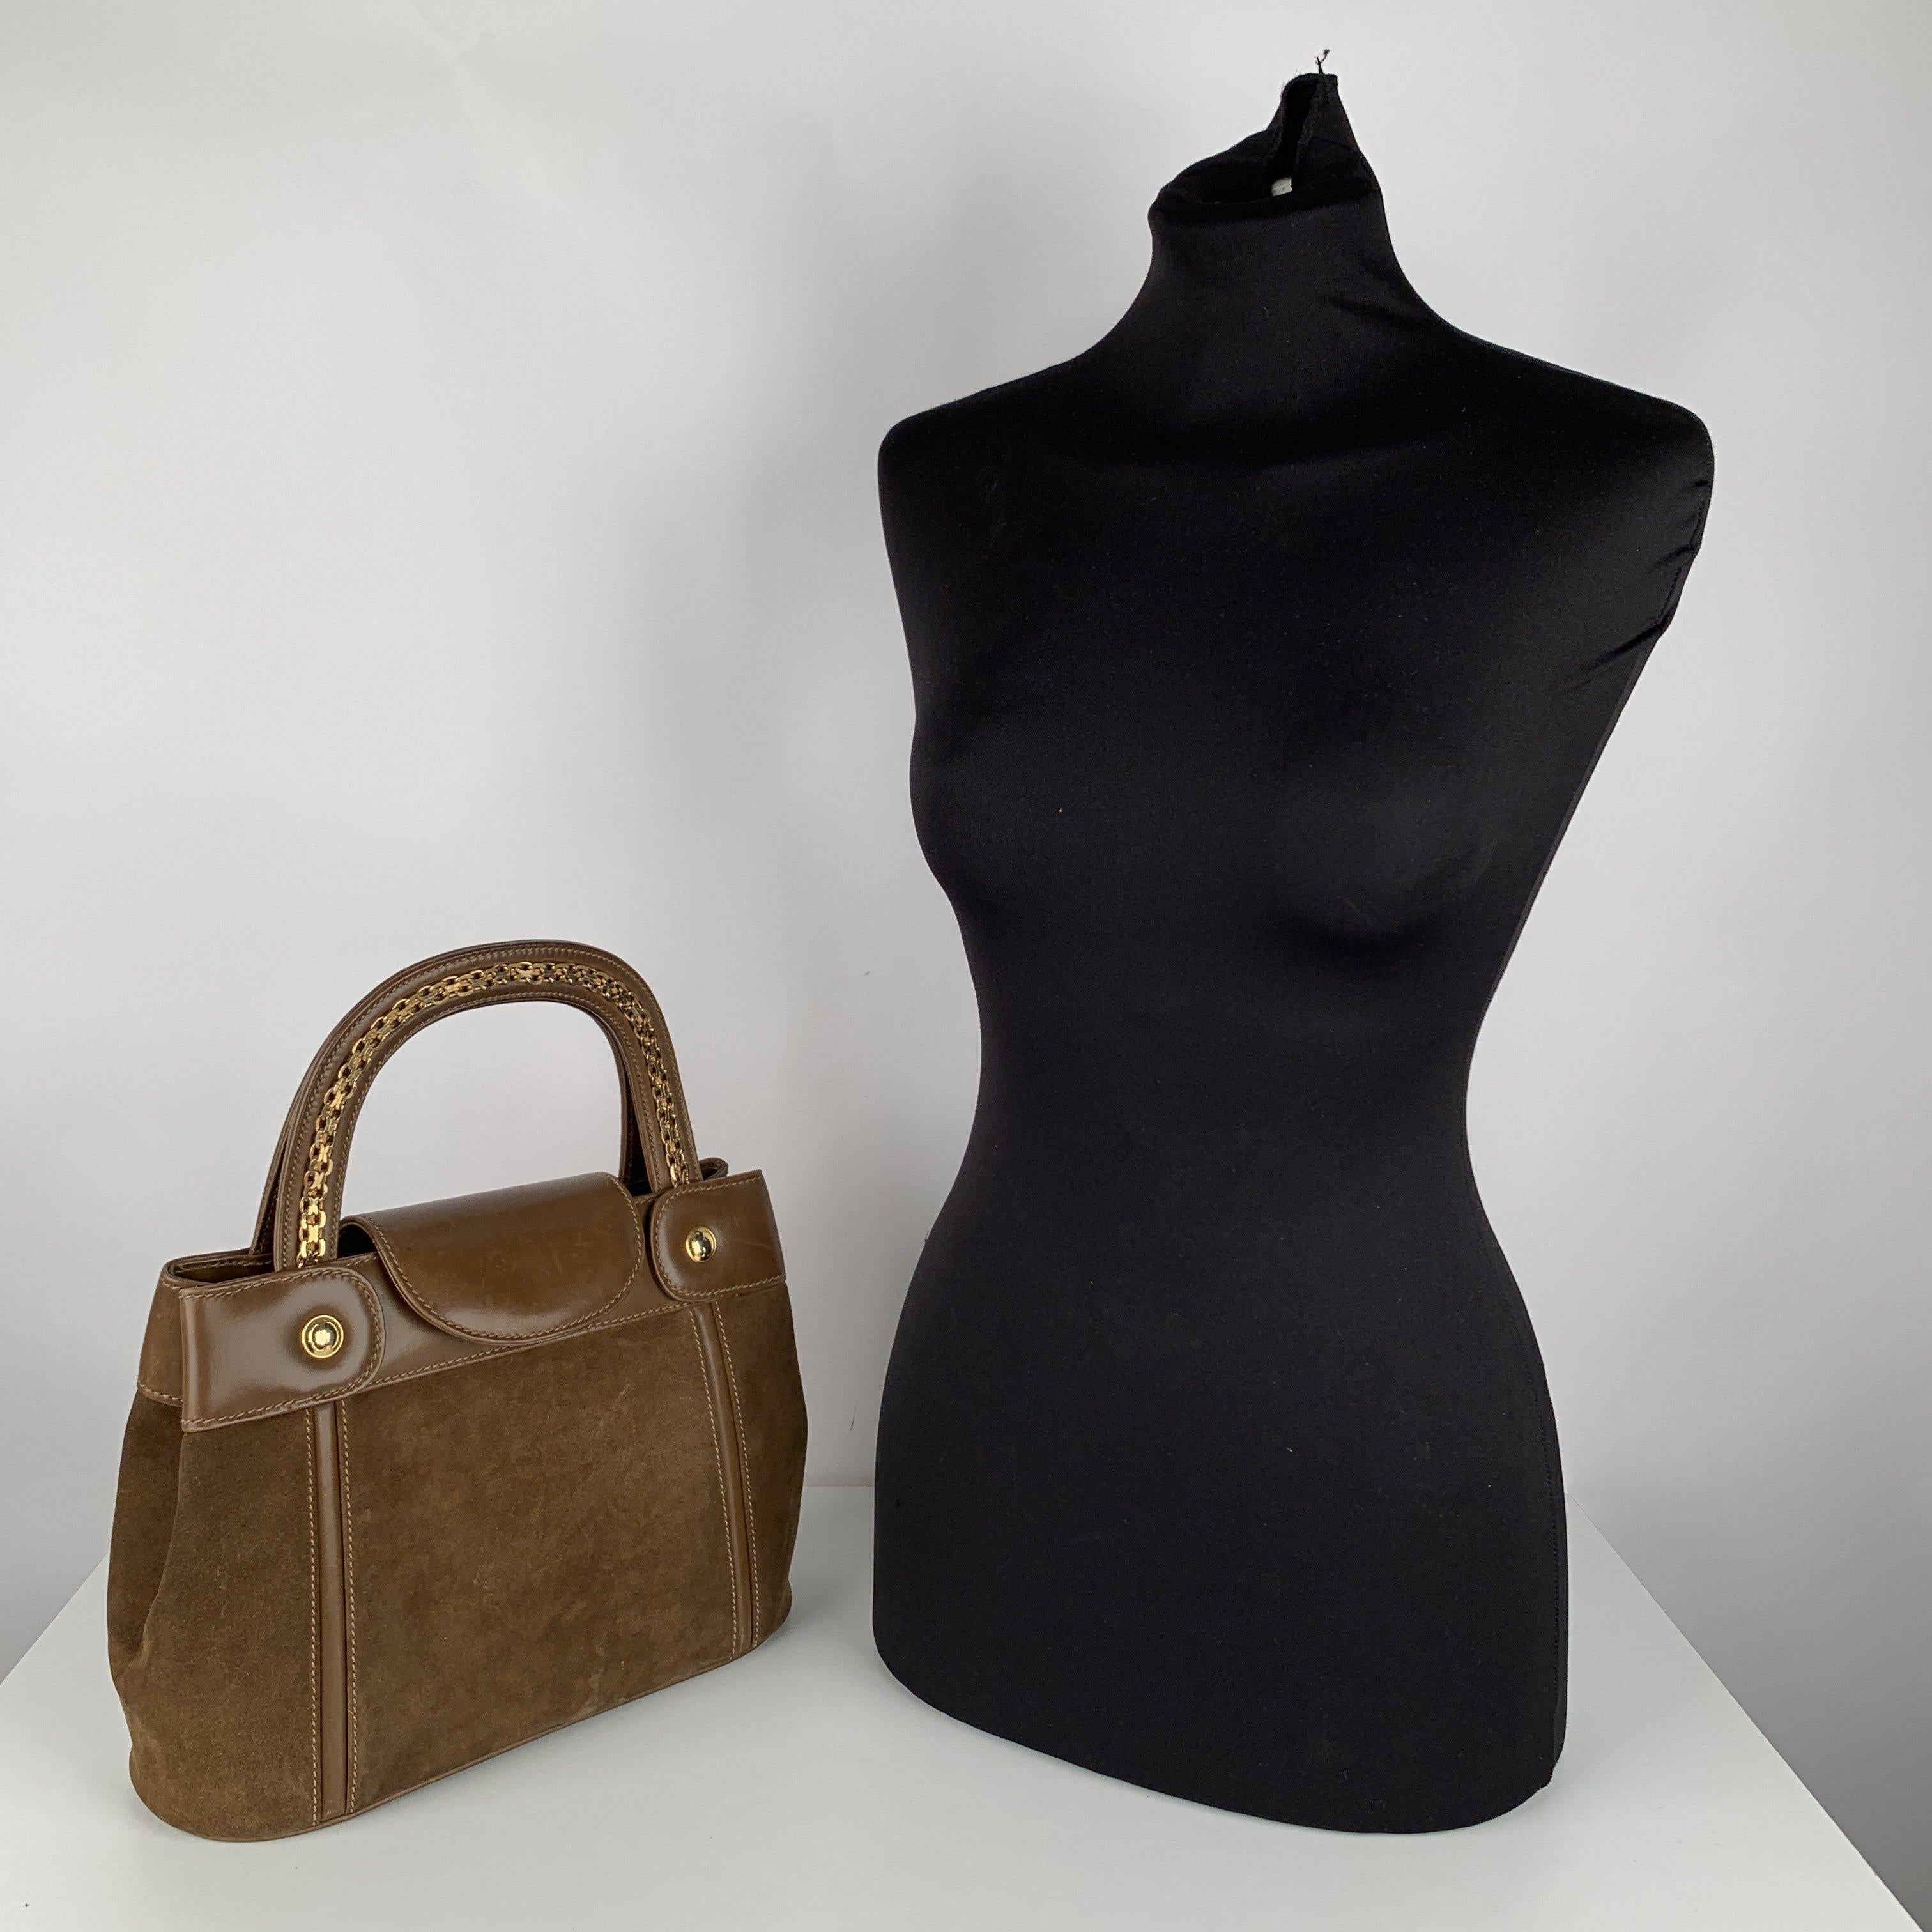 MATERIAL: Suede, Leather COLOR: Tan MODEL: Handbag GENDER: Women SIZE: Medium Condition CONDITION DETAILS: B :GOOD CONDITION - Some light wear of use - some normal wear of use on suede (light fading and scuffs due to normal use), some scratches on